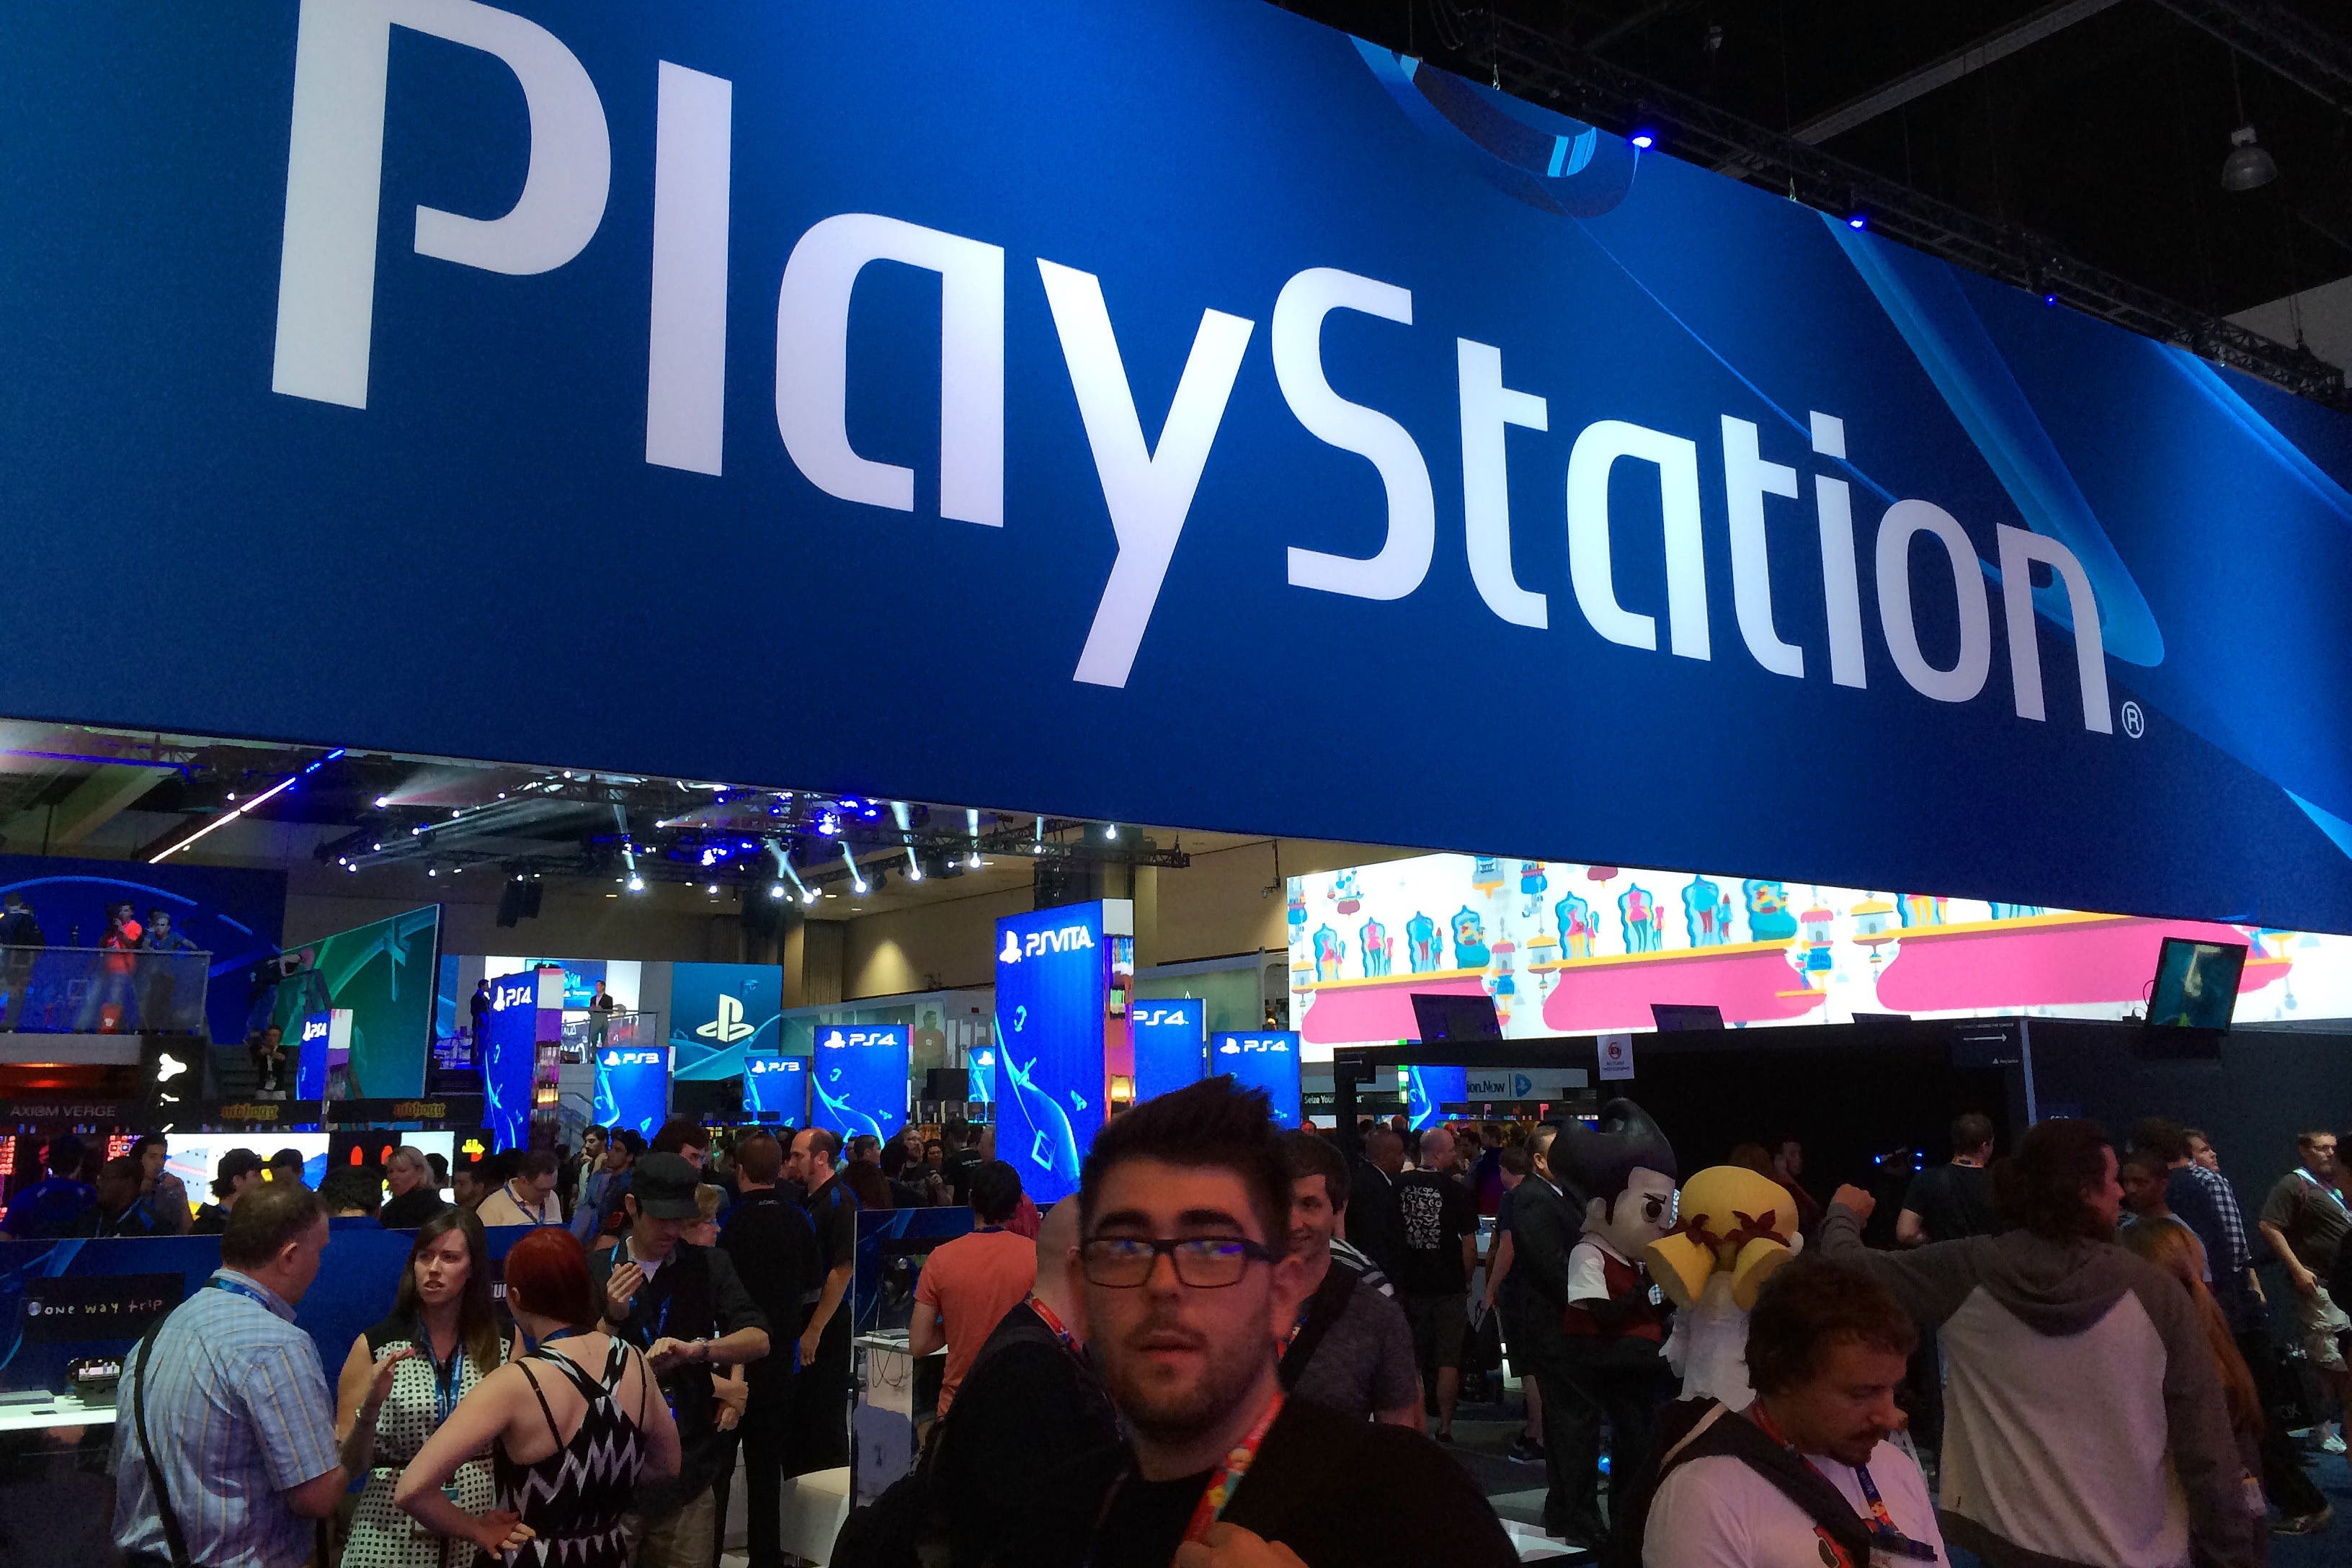 The organisers of the E3 gaming conference have cancelled the event permanently (Martyn Landi/PA)